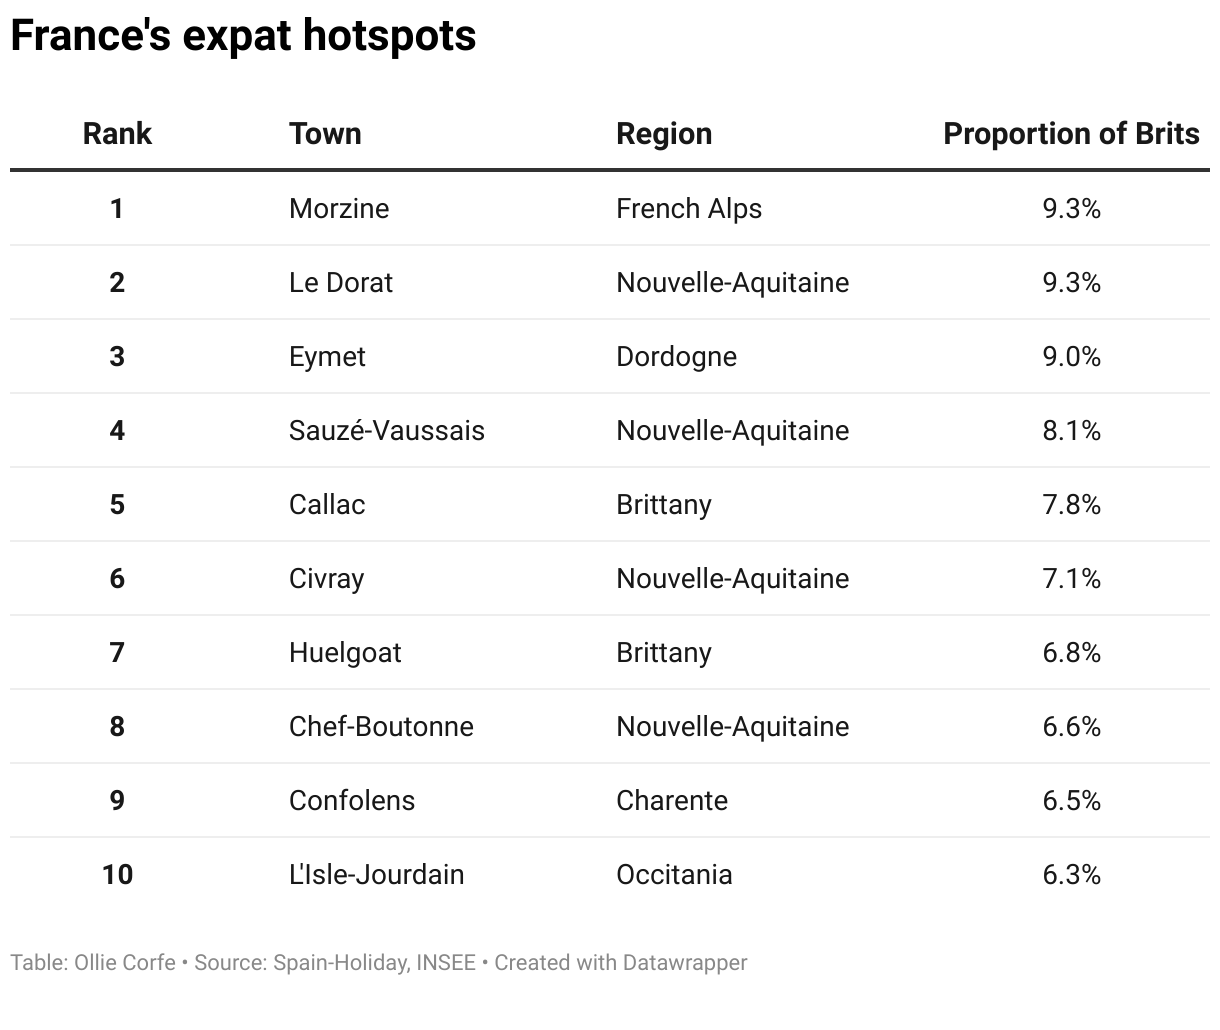 Table of top expat hotspots in France and Spain.